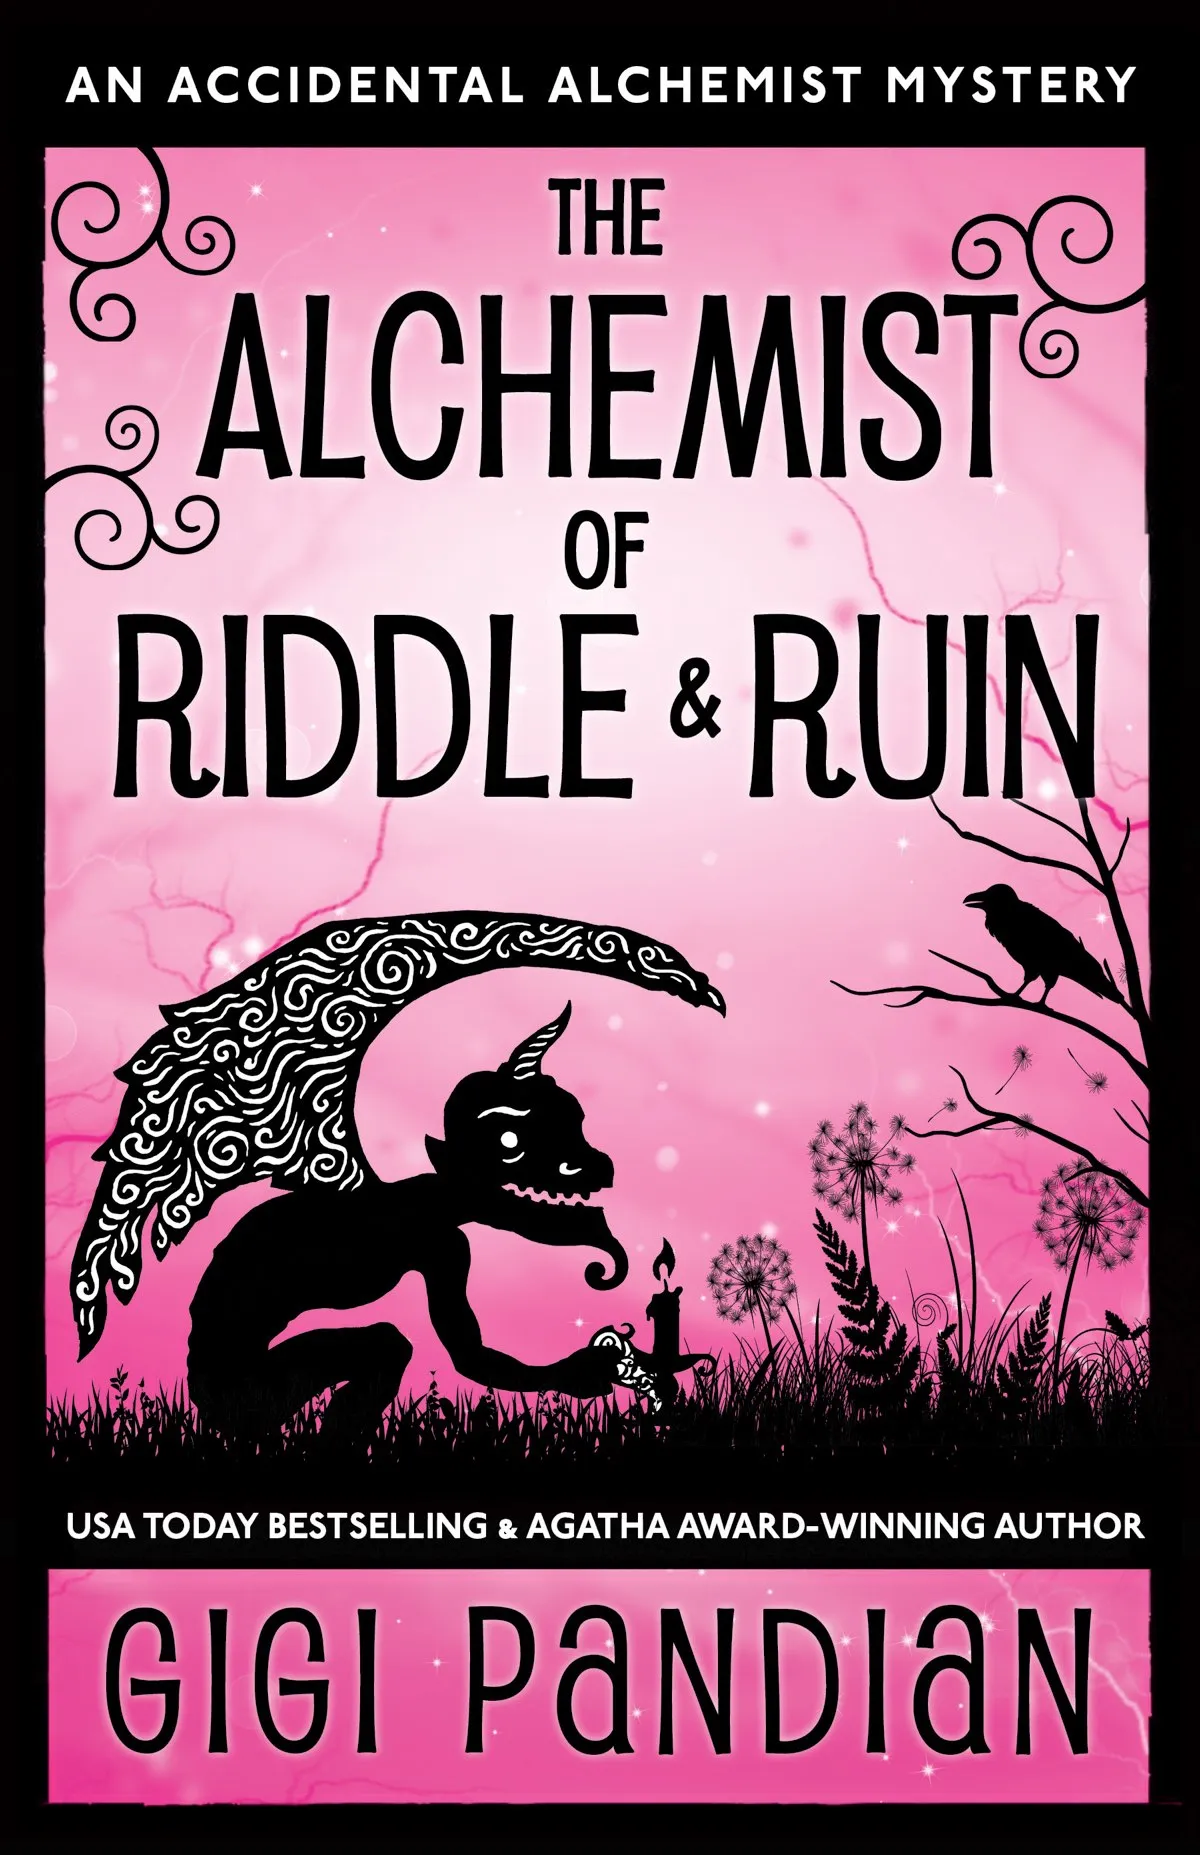 The Alchemist of Riddle and Ruin (An Accidental Alchemist Mystery #6)